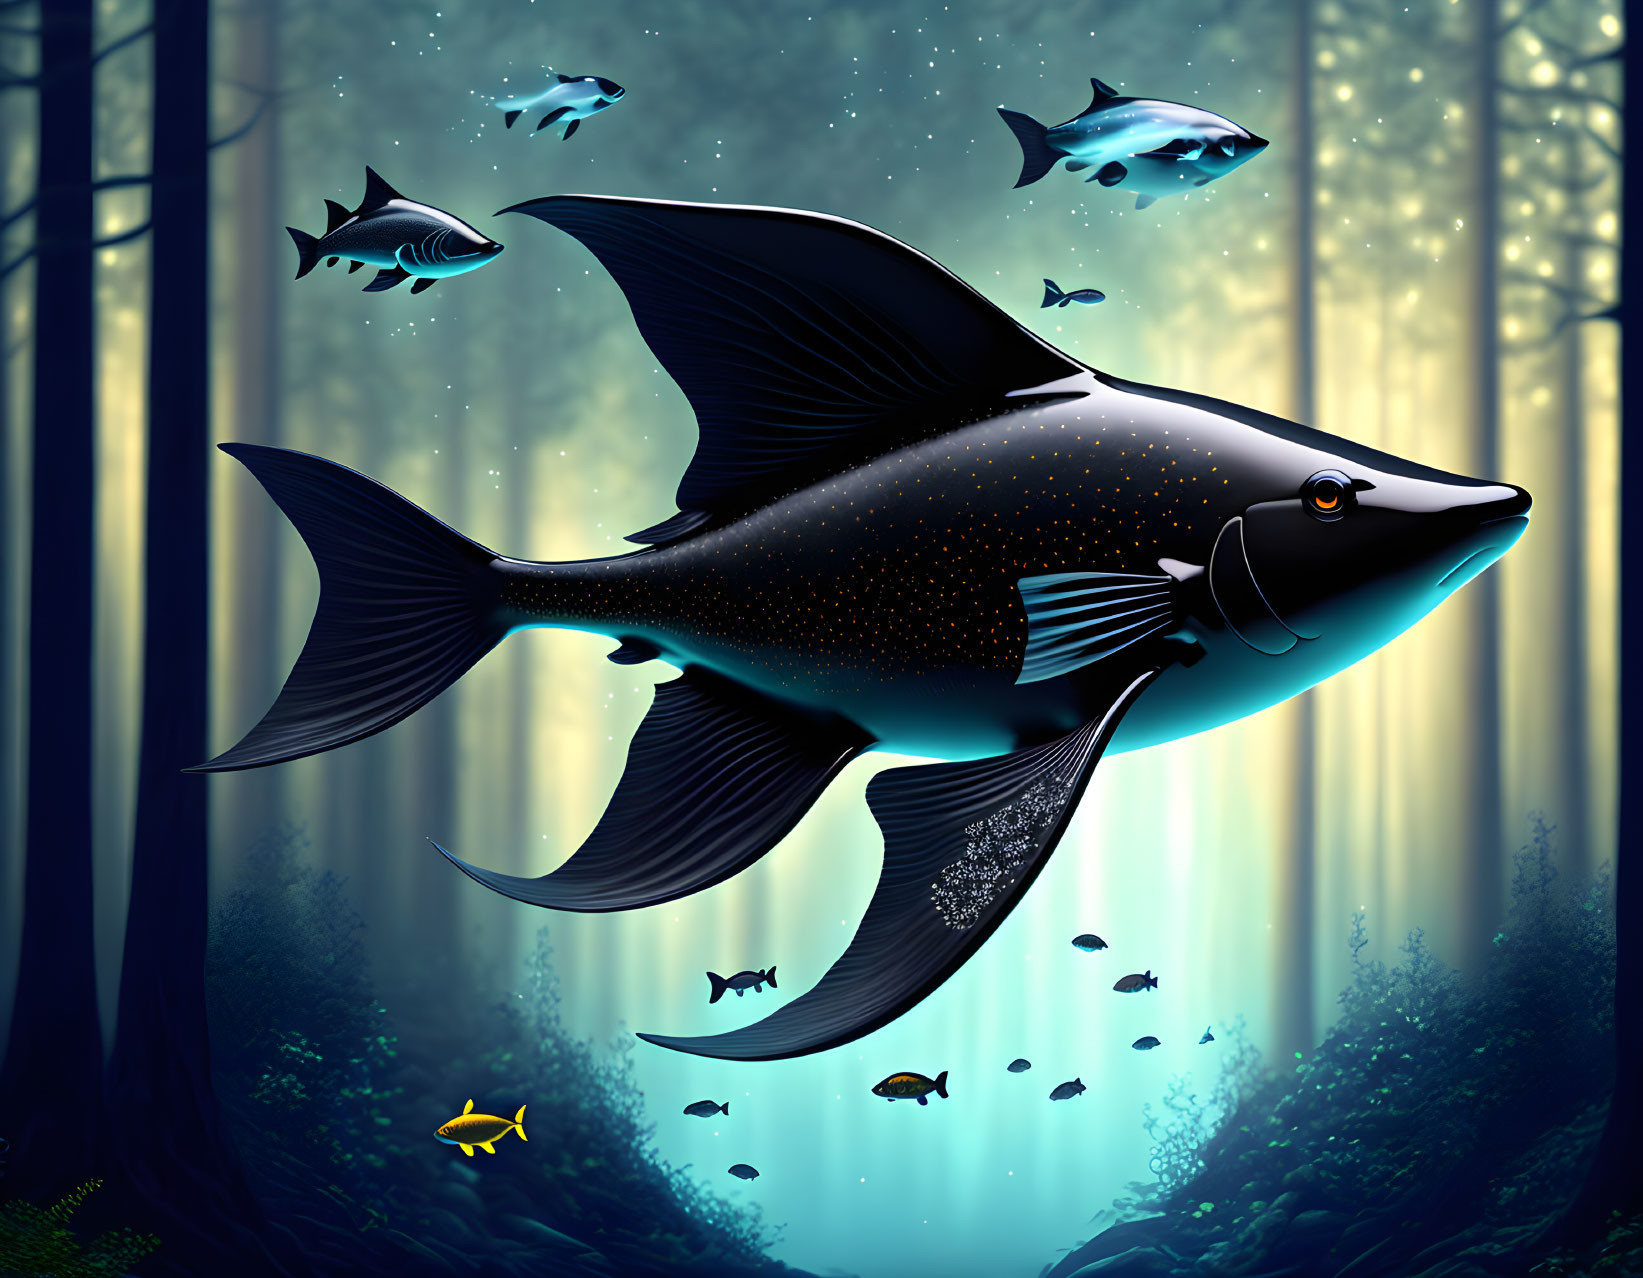 Giant Fish in Enchanting Underwater Forest with Small Fishes and Beams of Light